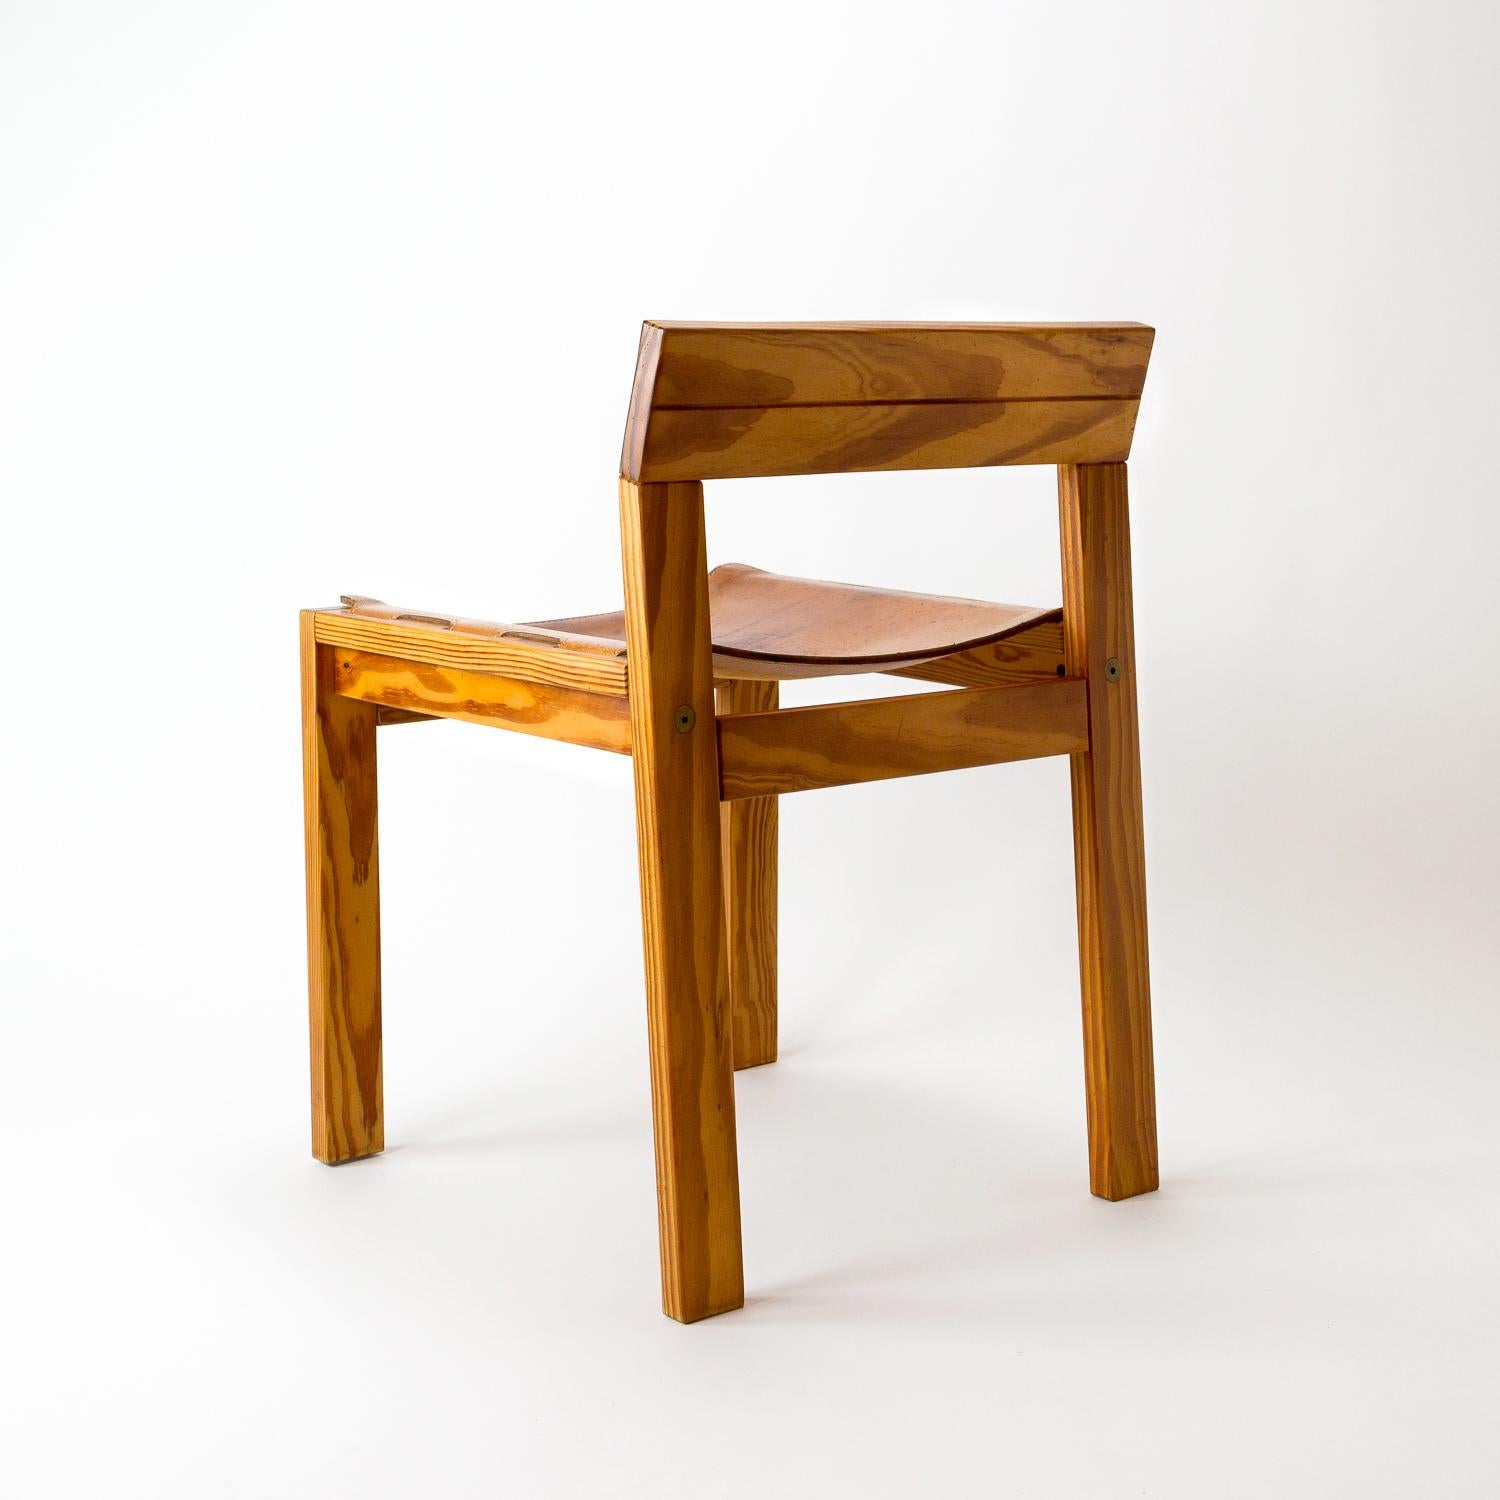 Danish Pitch Pine and Cognac Leather Side Chair, Denmark, 1970s For Sale